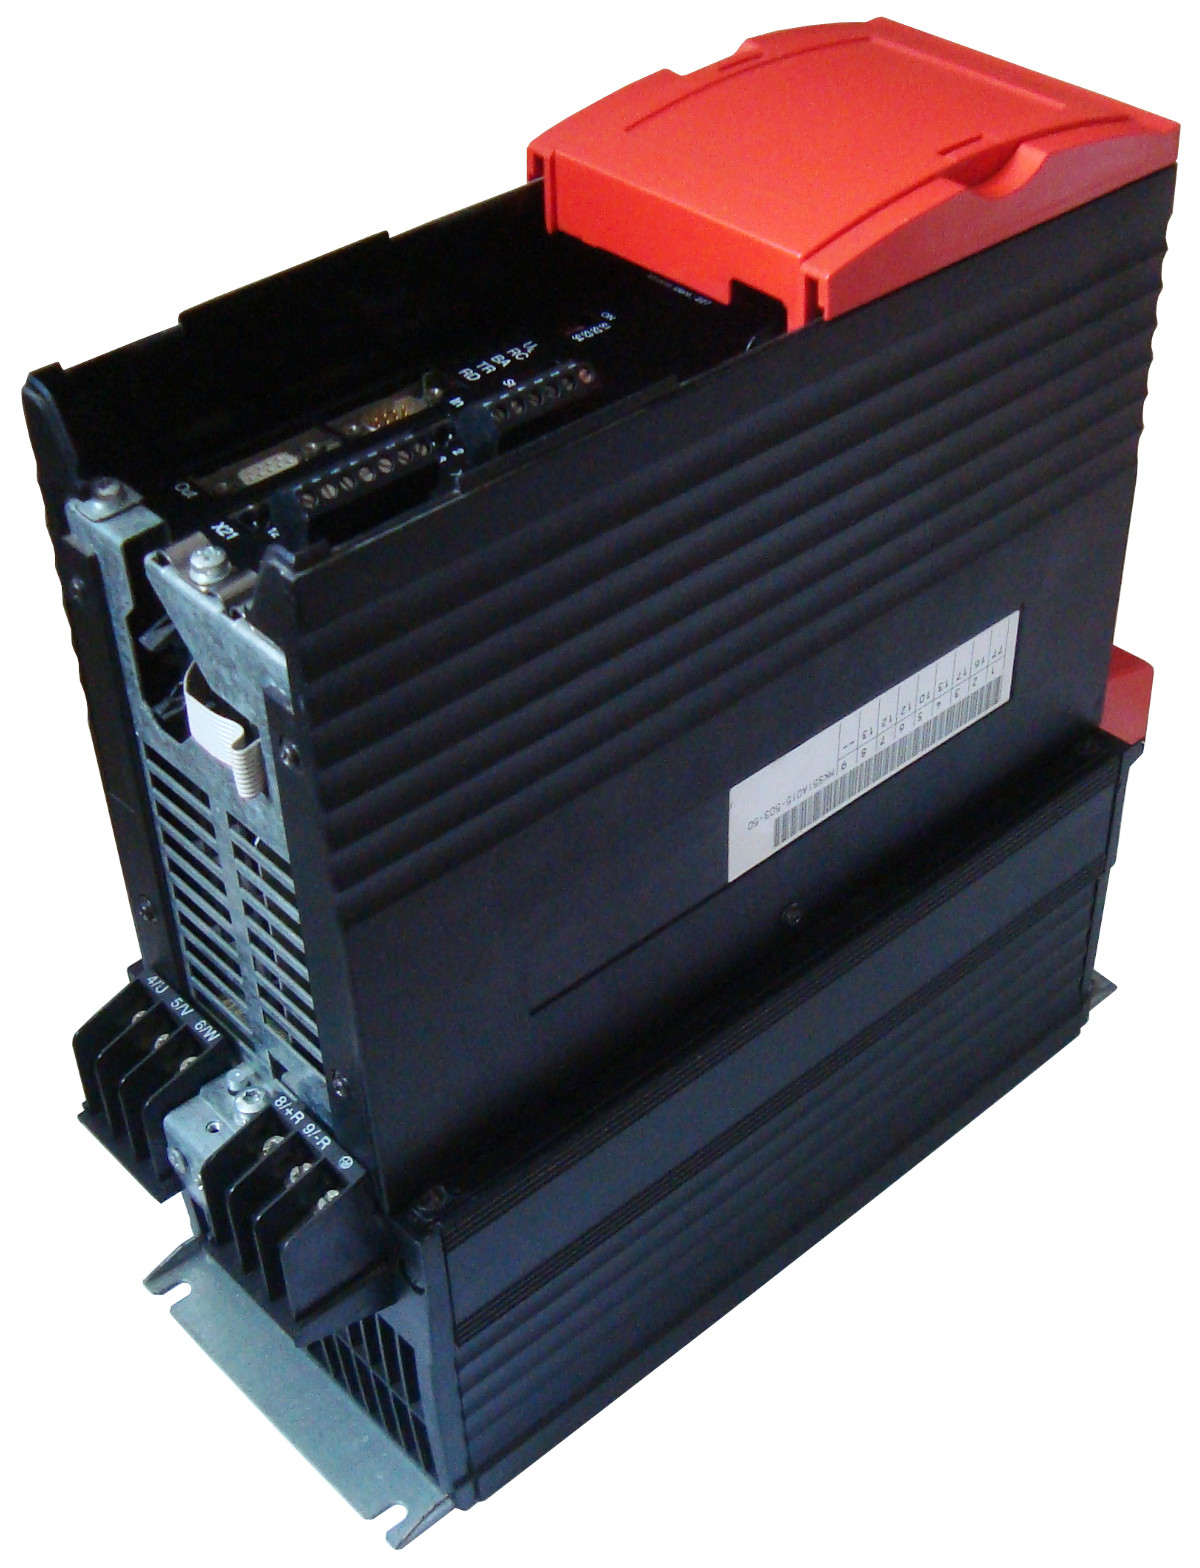 3 Frequency Inverter Mks51a015-503-50 Buy Germany Stock